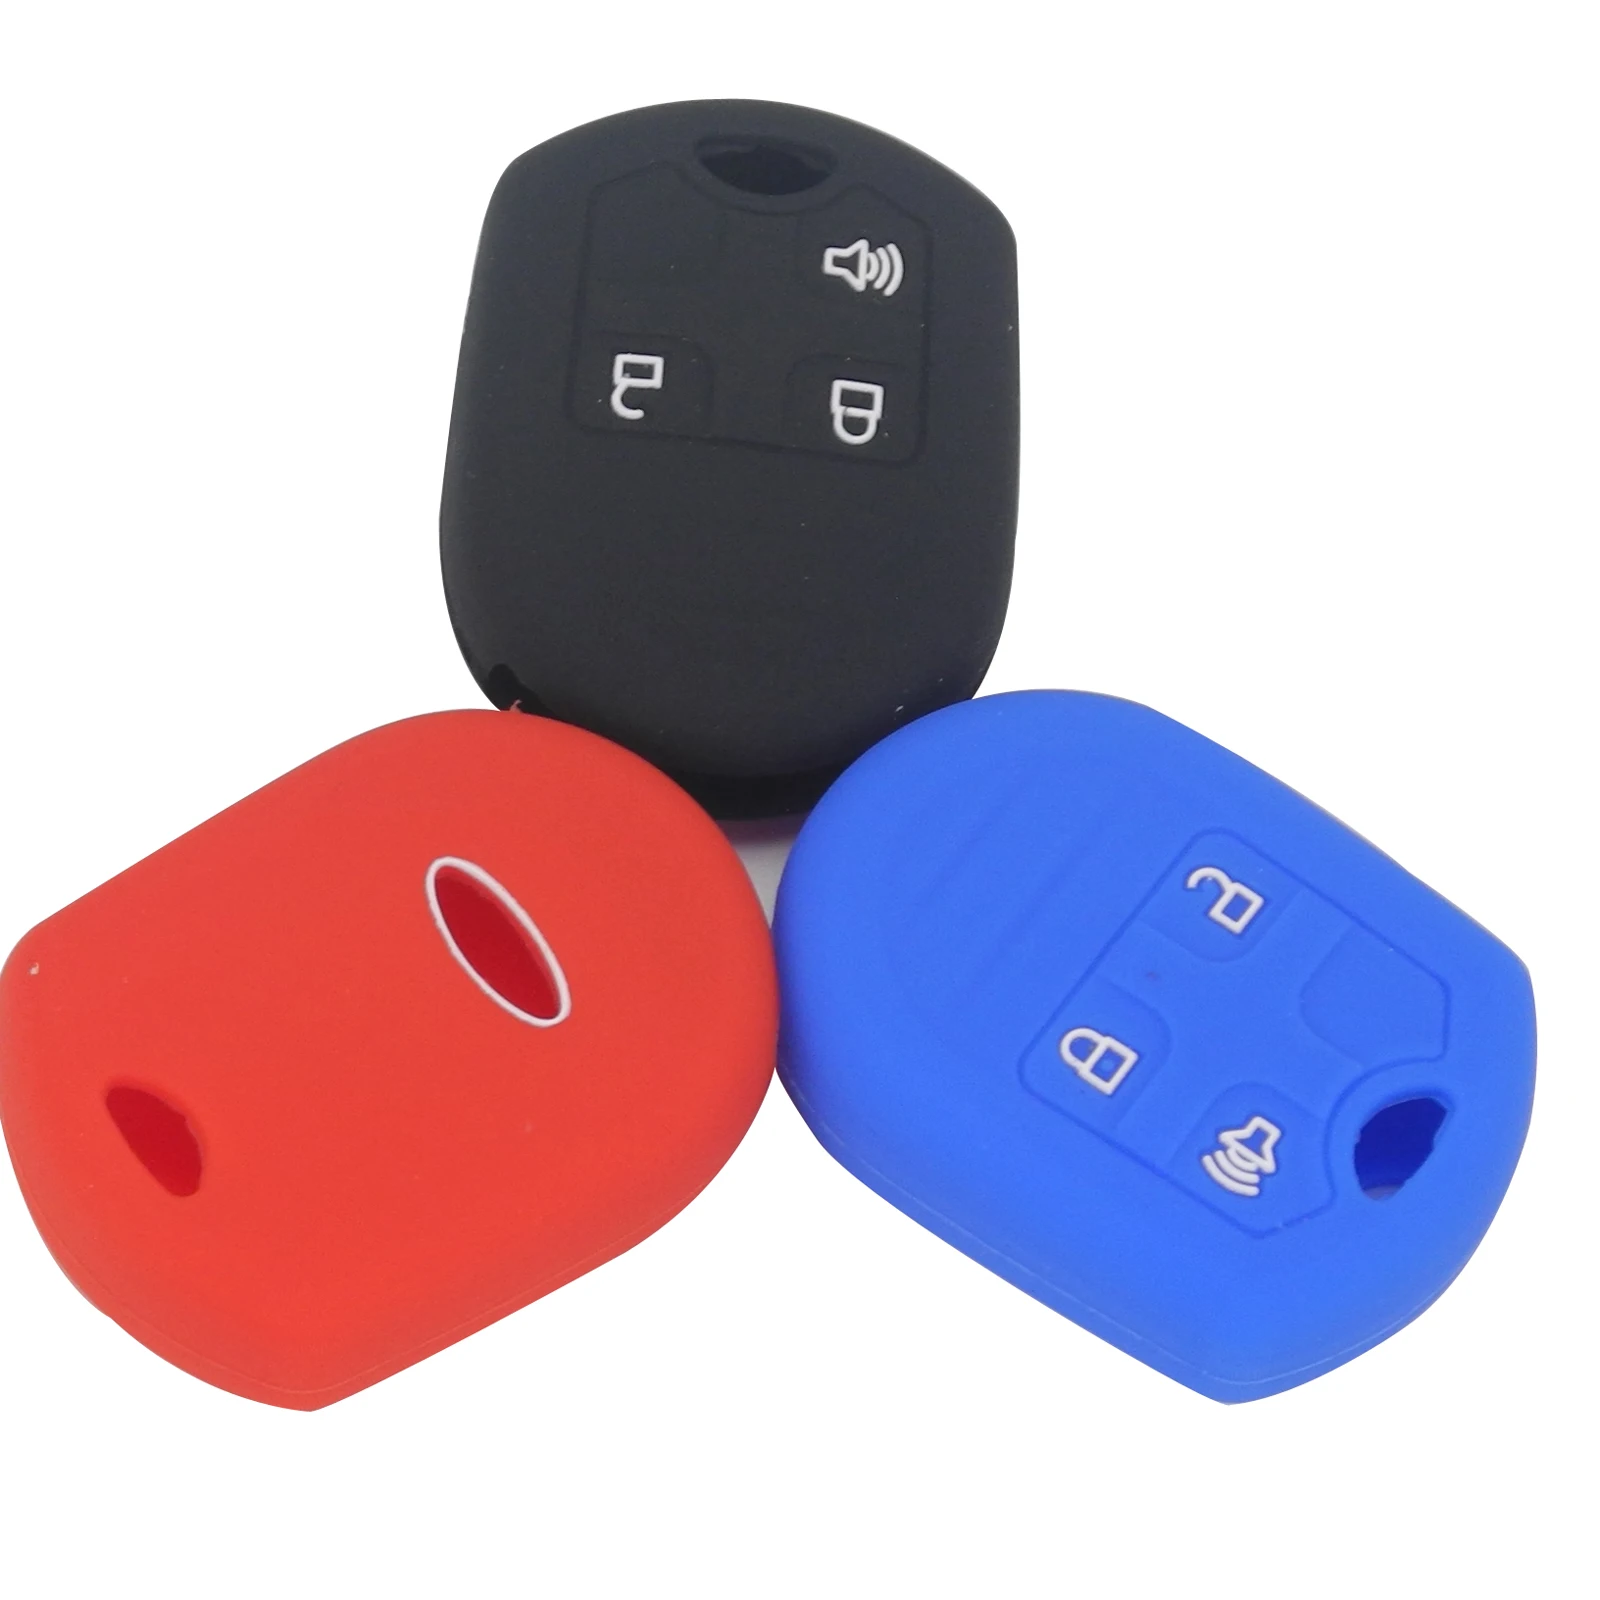 jingyuqin 10pcs 3BTN Silicone Key Case For Ford Explorer Flex Focus Taurus Escape Mustang Cover Holder Protector Car Accessories